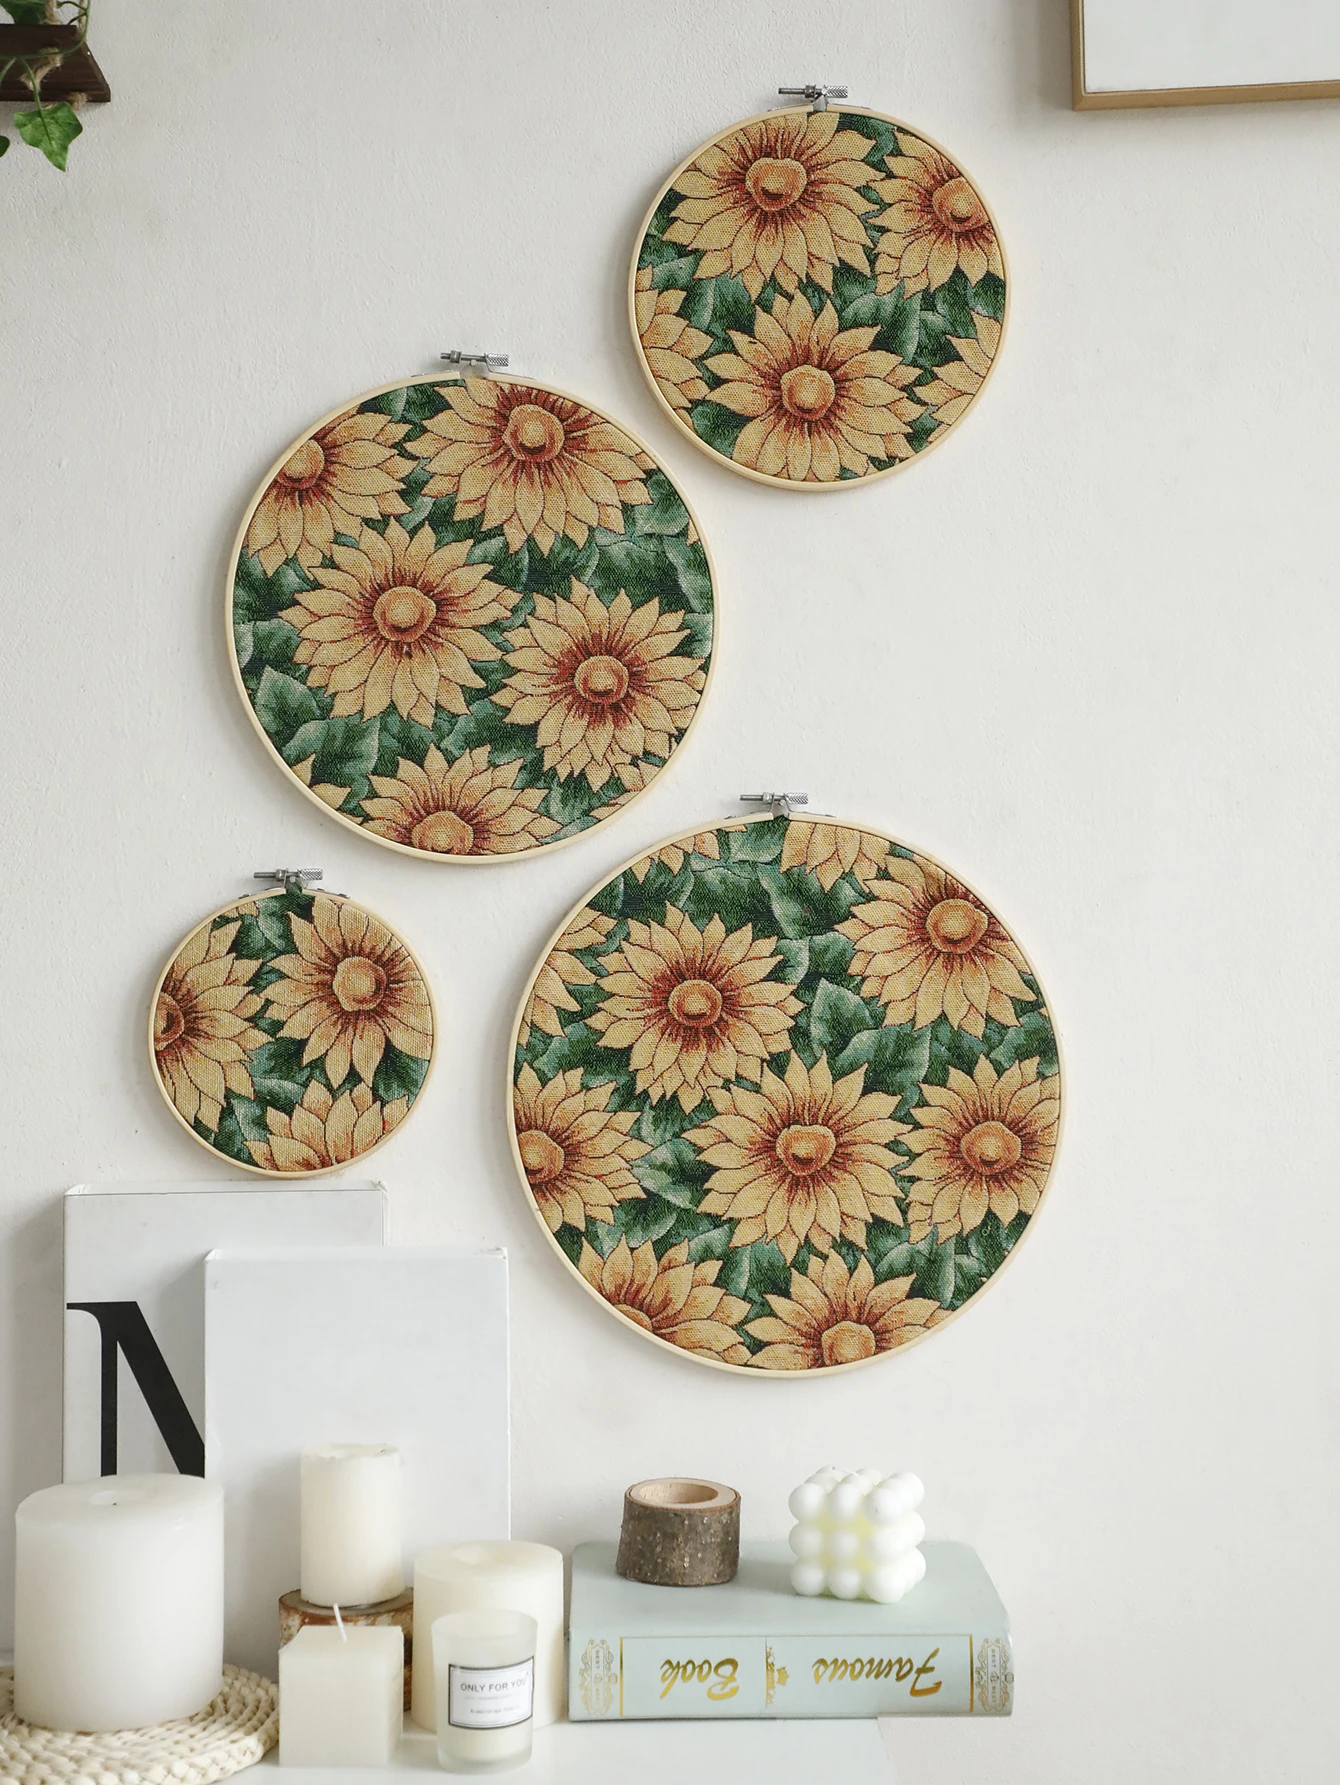 

4Pcs Sunflower Tapestry Wall Hanging Decor Room Decors Aesthetic Pastoral Decoration Handmade Tapestries for Spring Home Decor